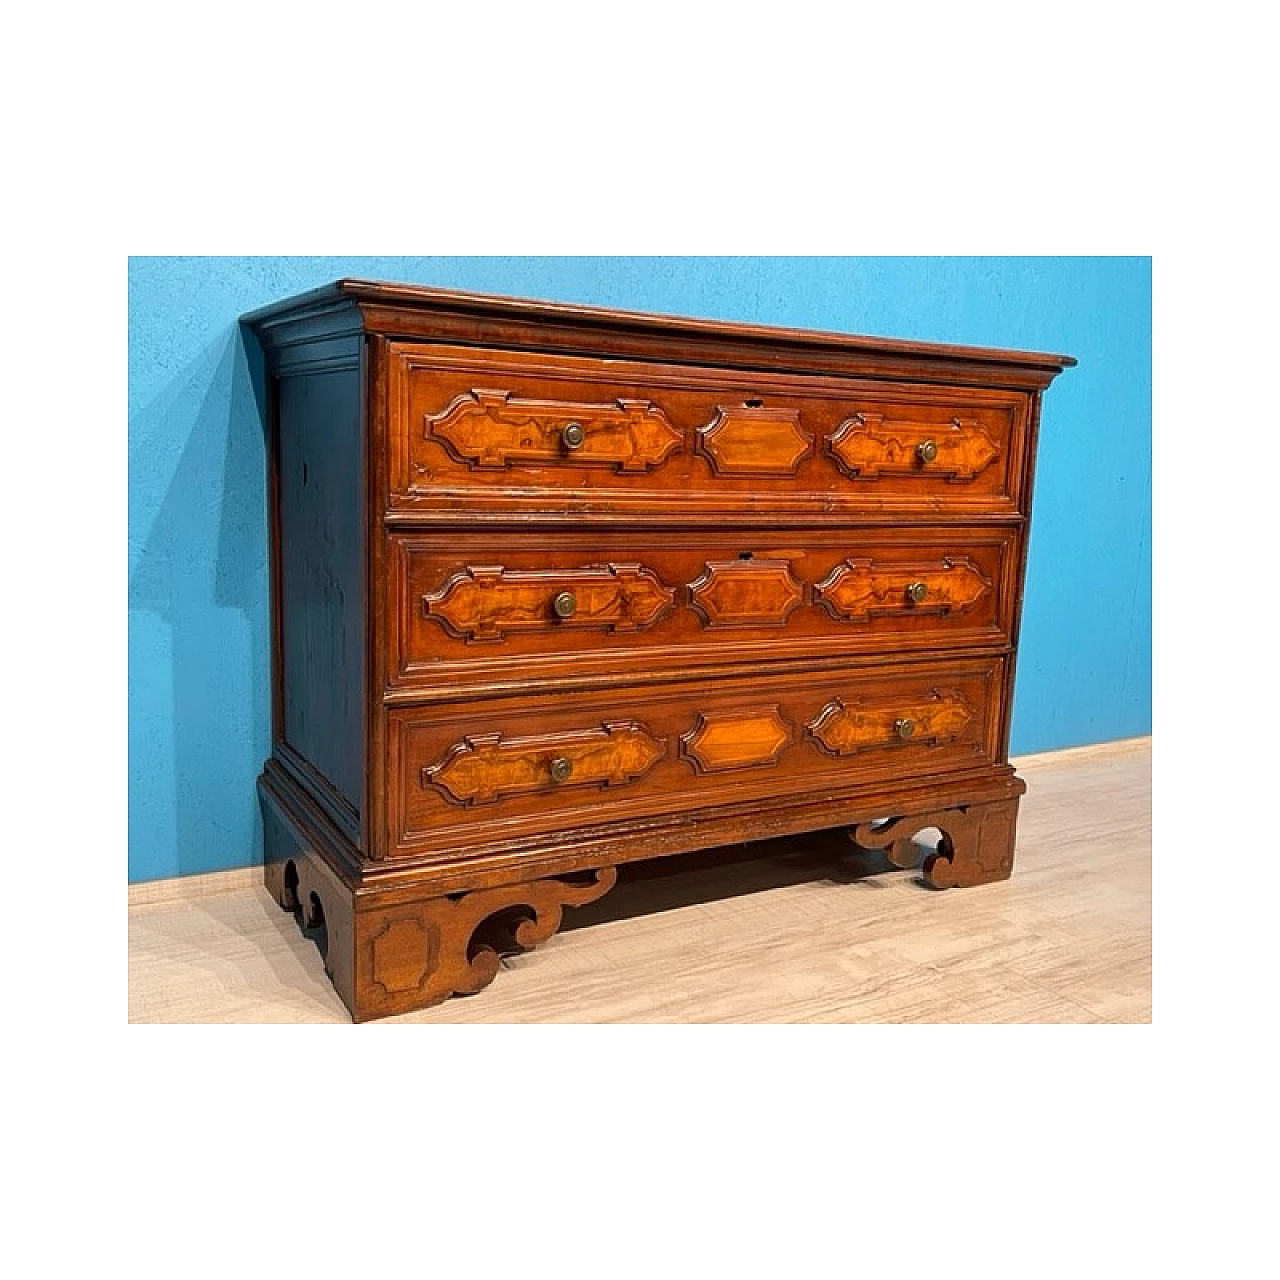 Lombardy chest of drawers in cherry wood, late 18th century 11